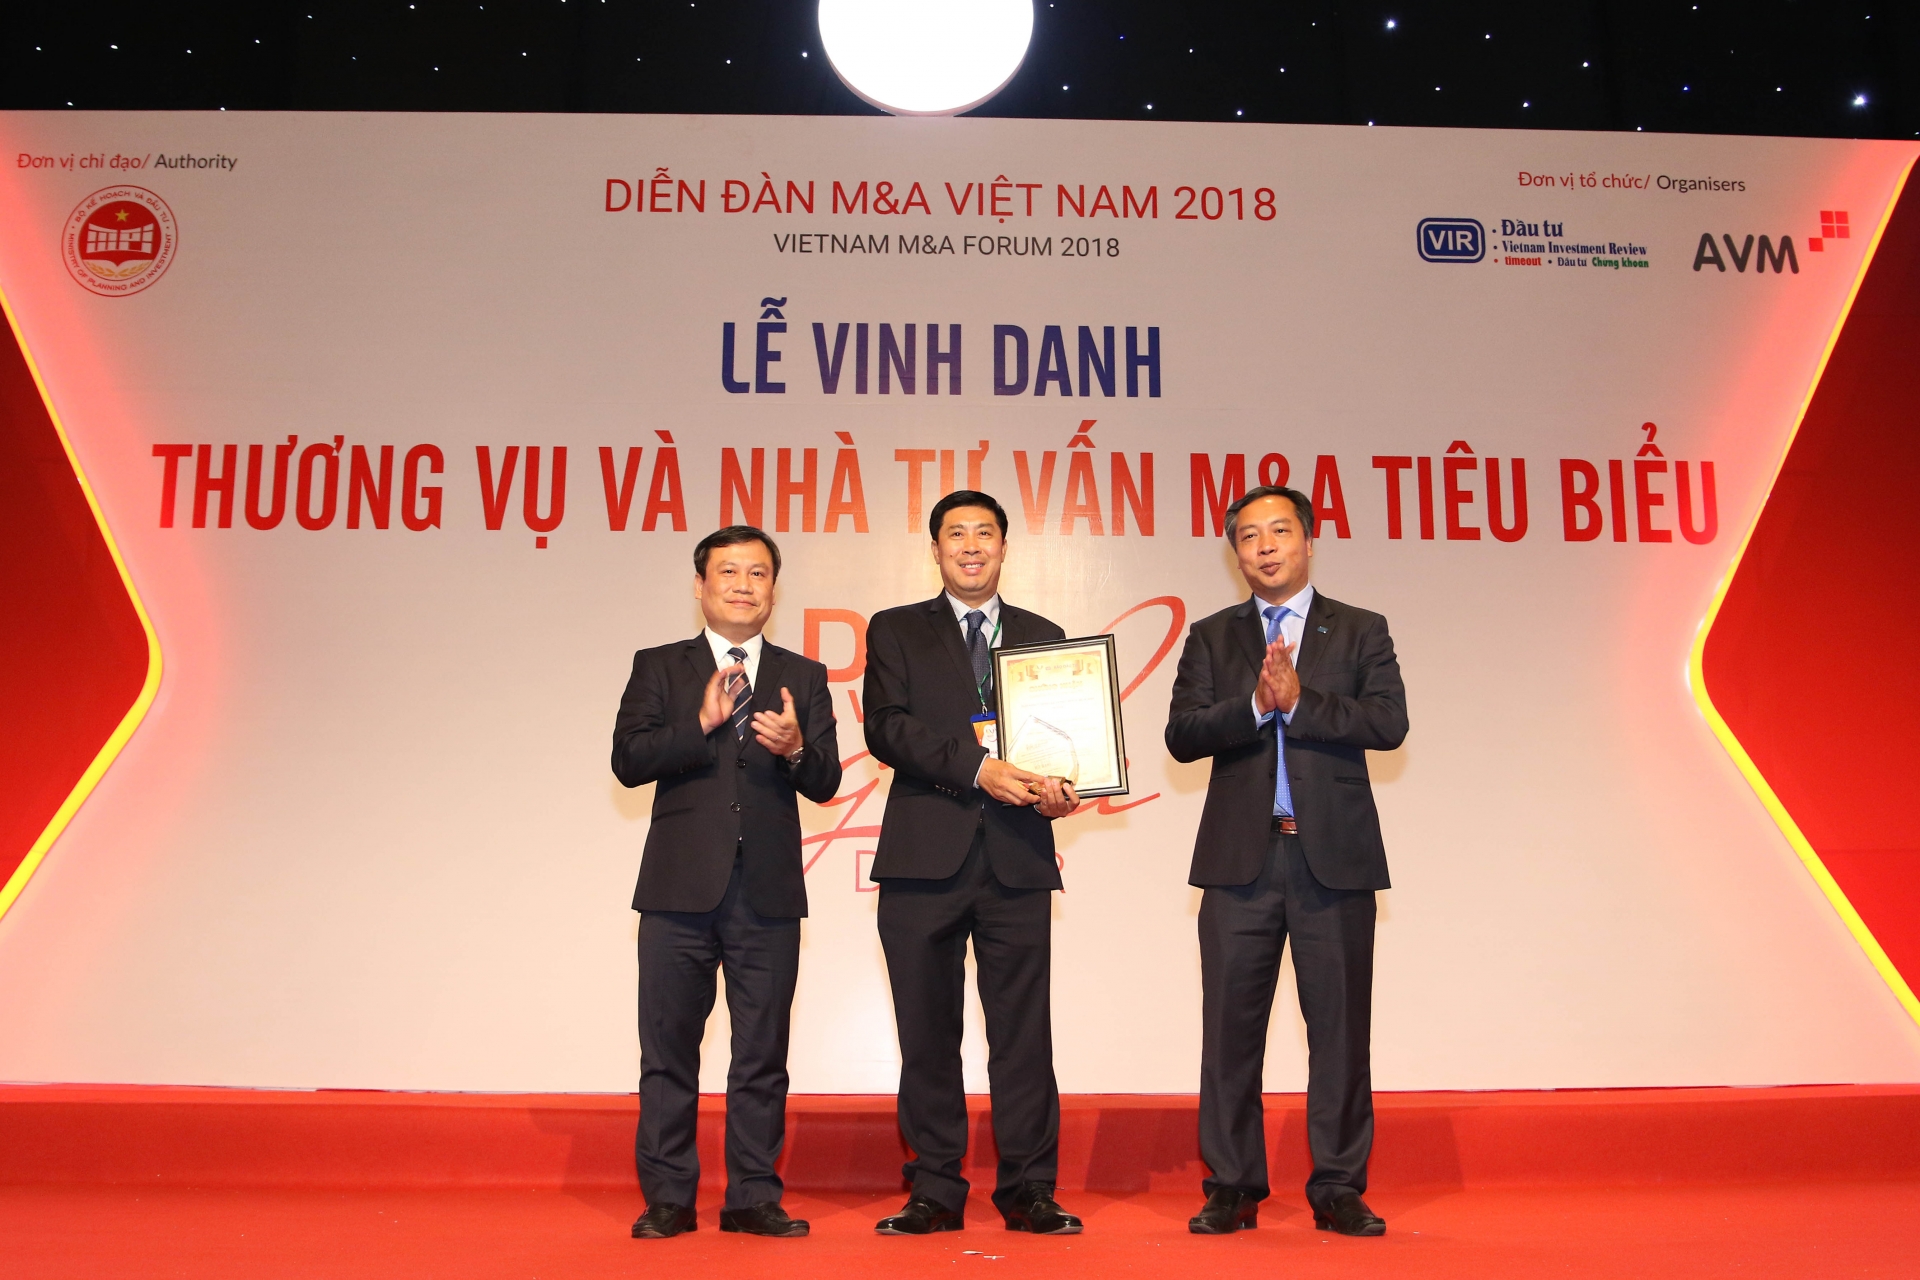 Vietnam M&A Forum 2018 award winners for 2017-2018 and the decade